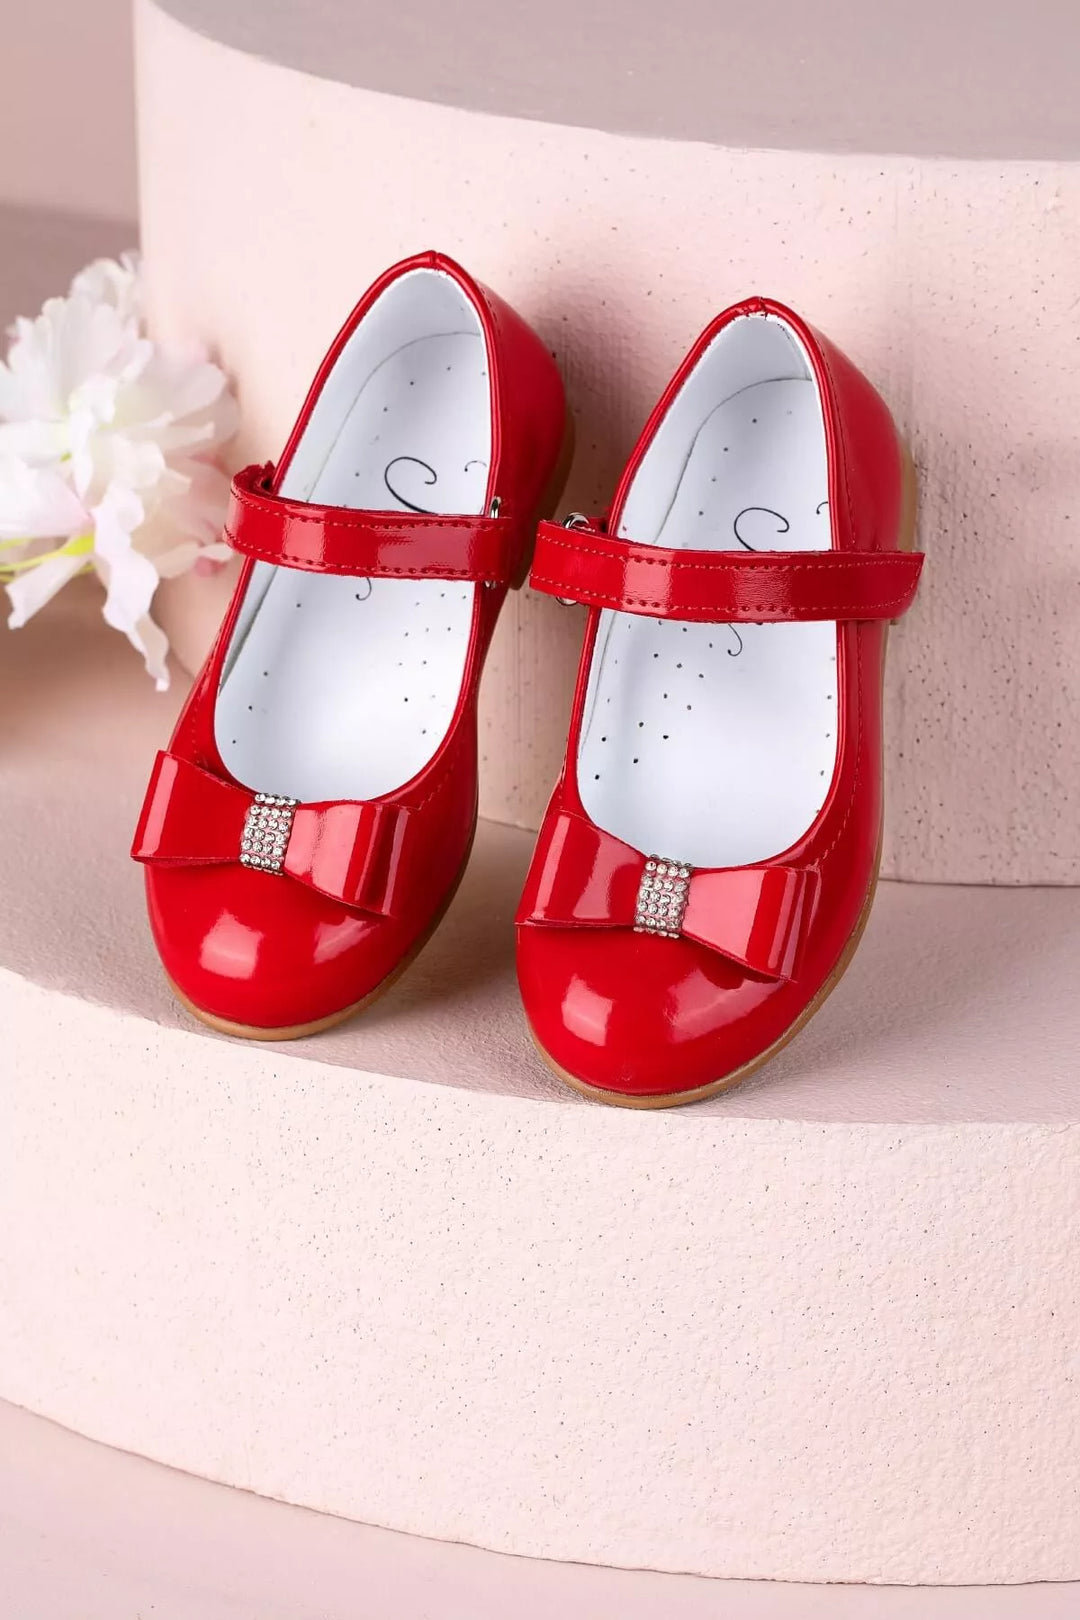 Red toddler shoes that have crystal stone ornaments and bow tie